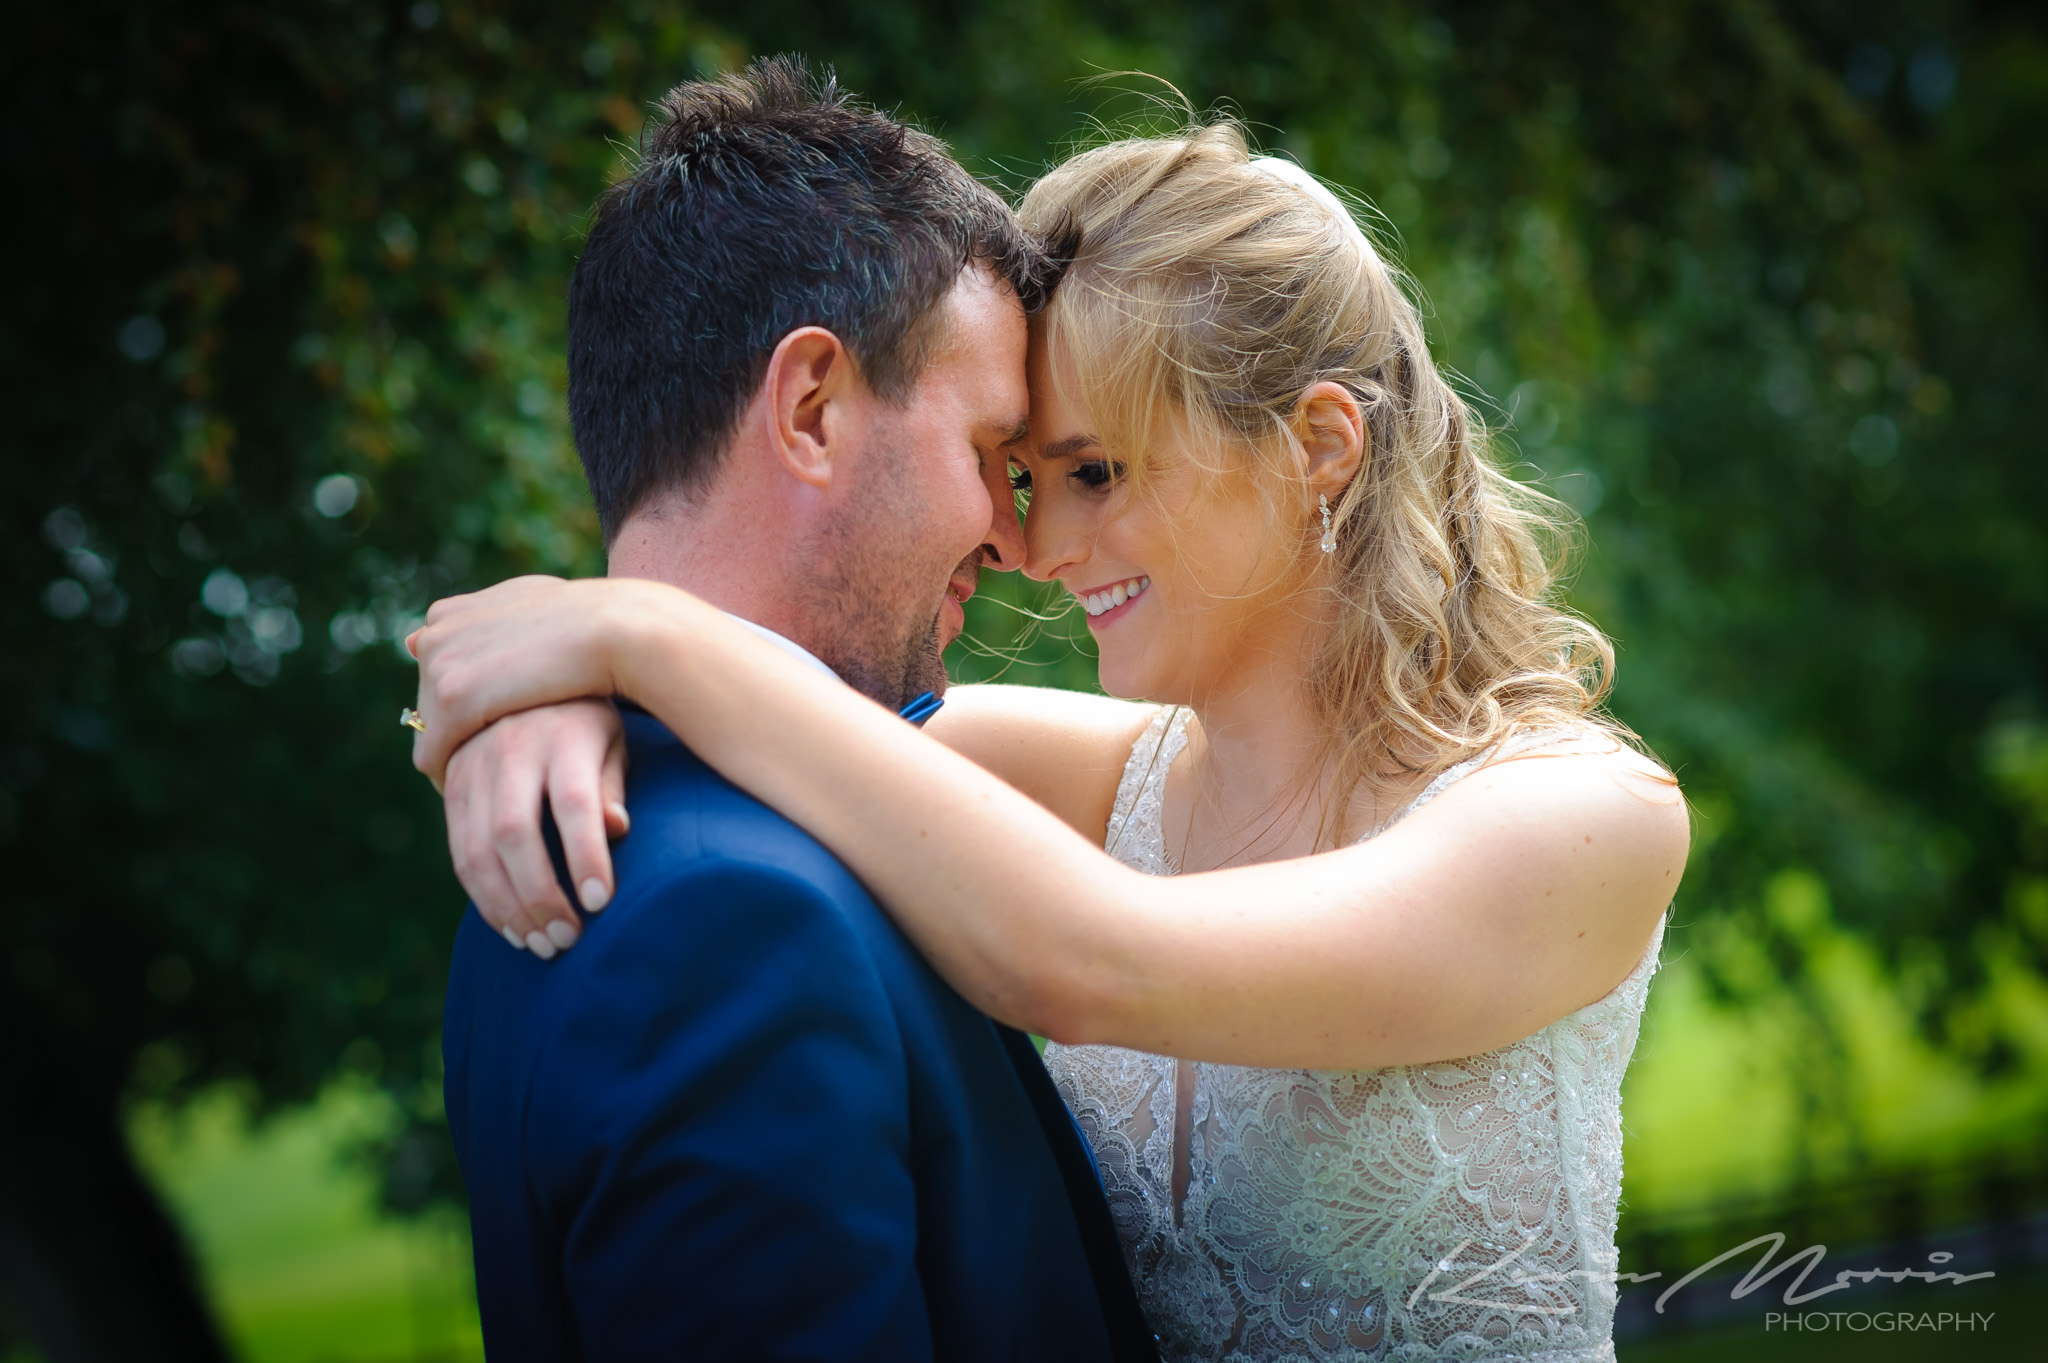 Dublin and Donabate Wedding Photographer - Kevin Morris 